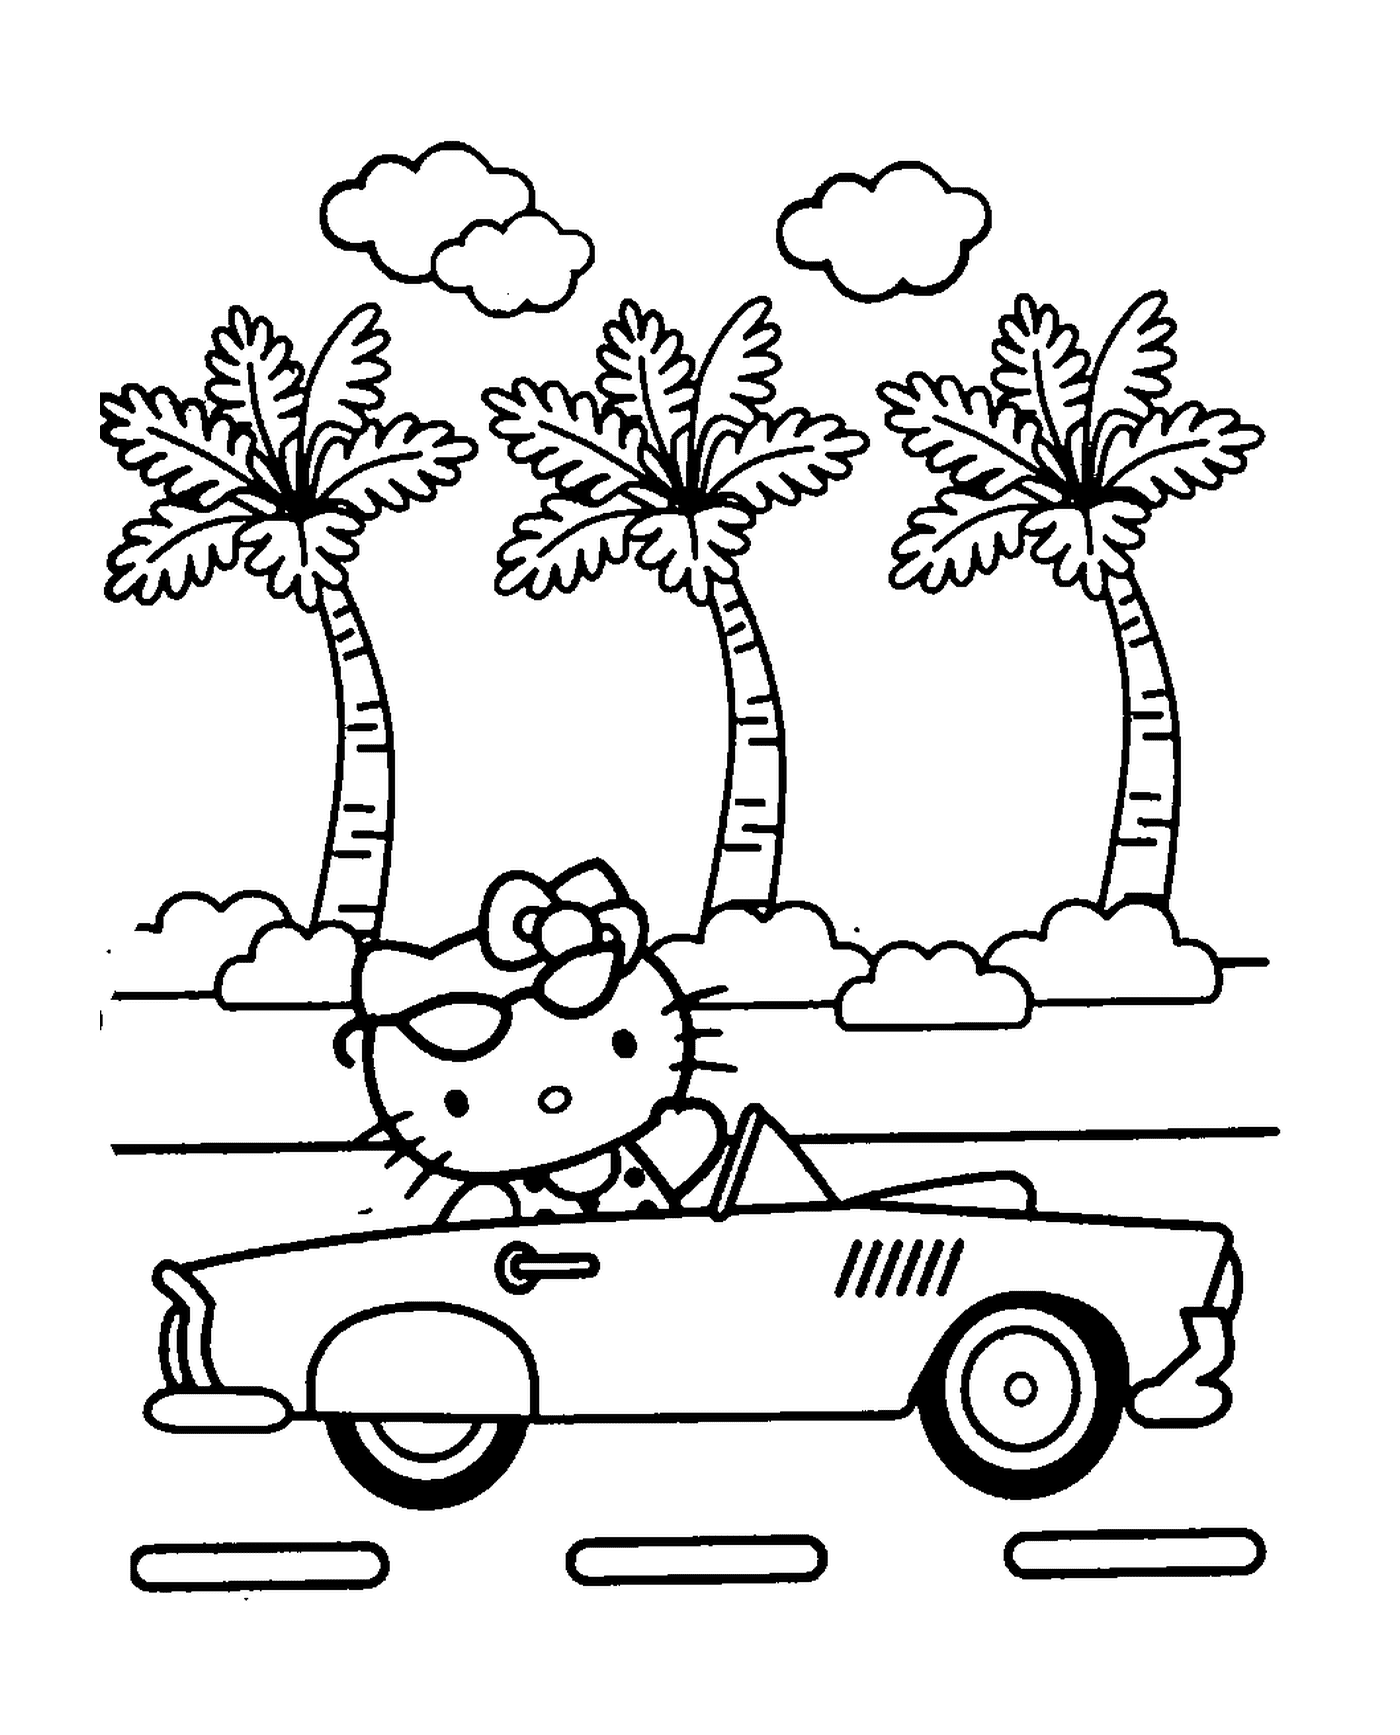  Hello Kitty driving a car in front of palm trees 